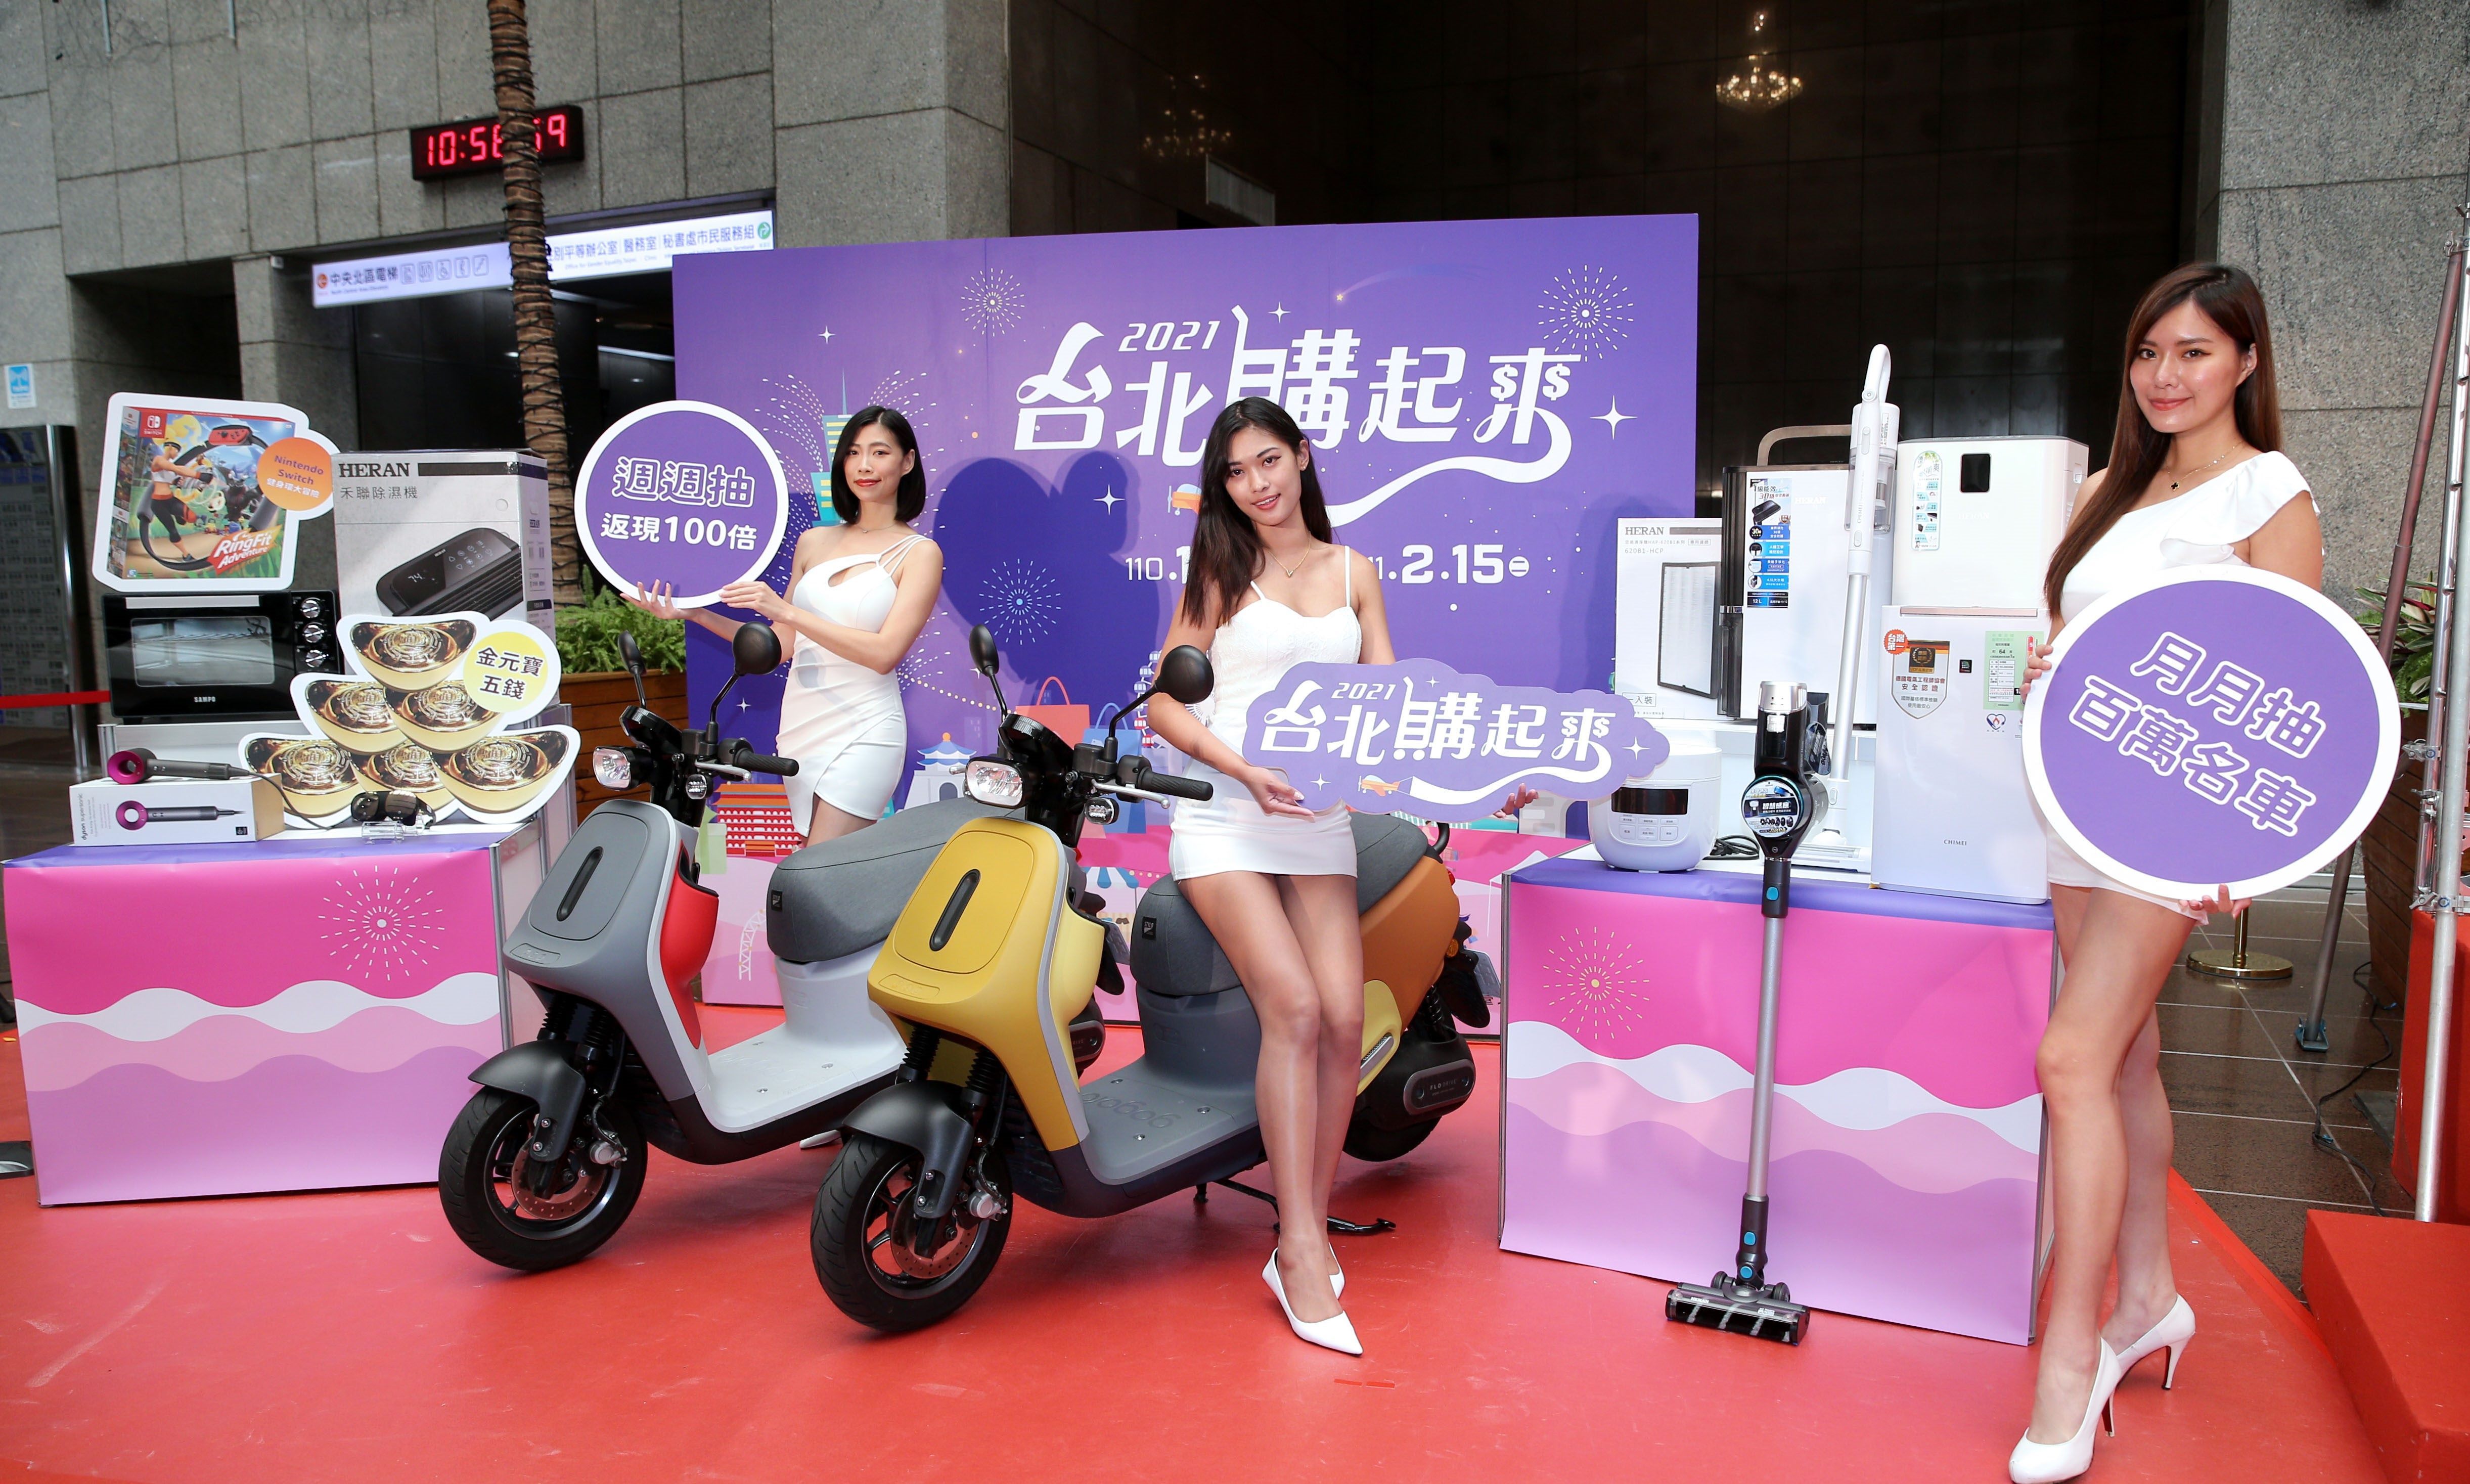 Taipei Shopping Season to Offer Raffles Daily, Weekly, Monthly